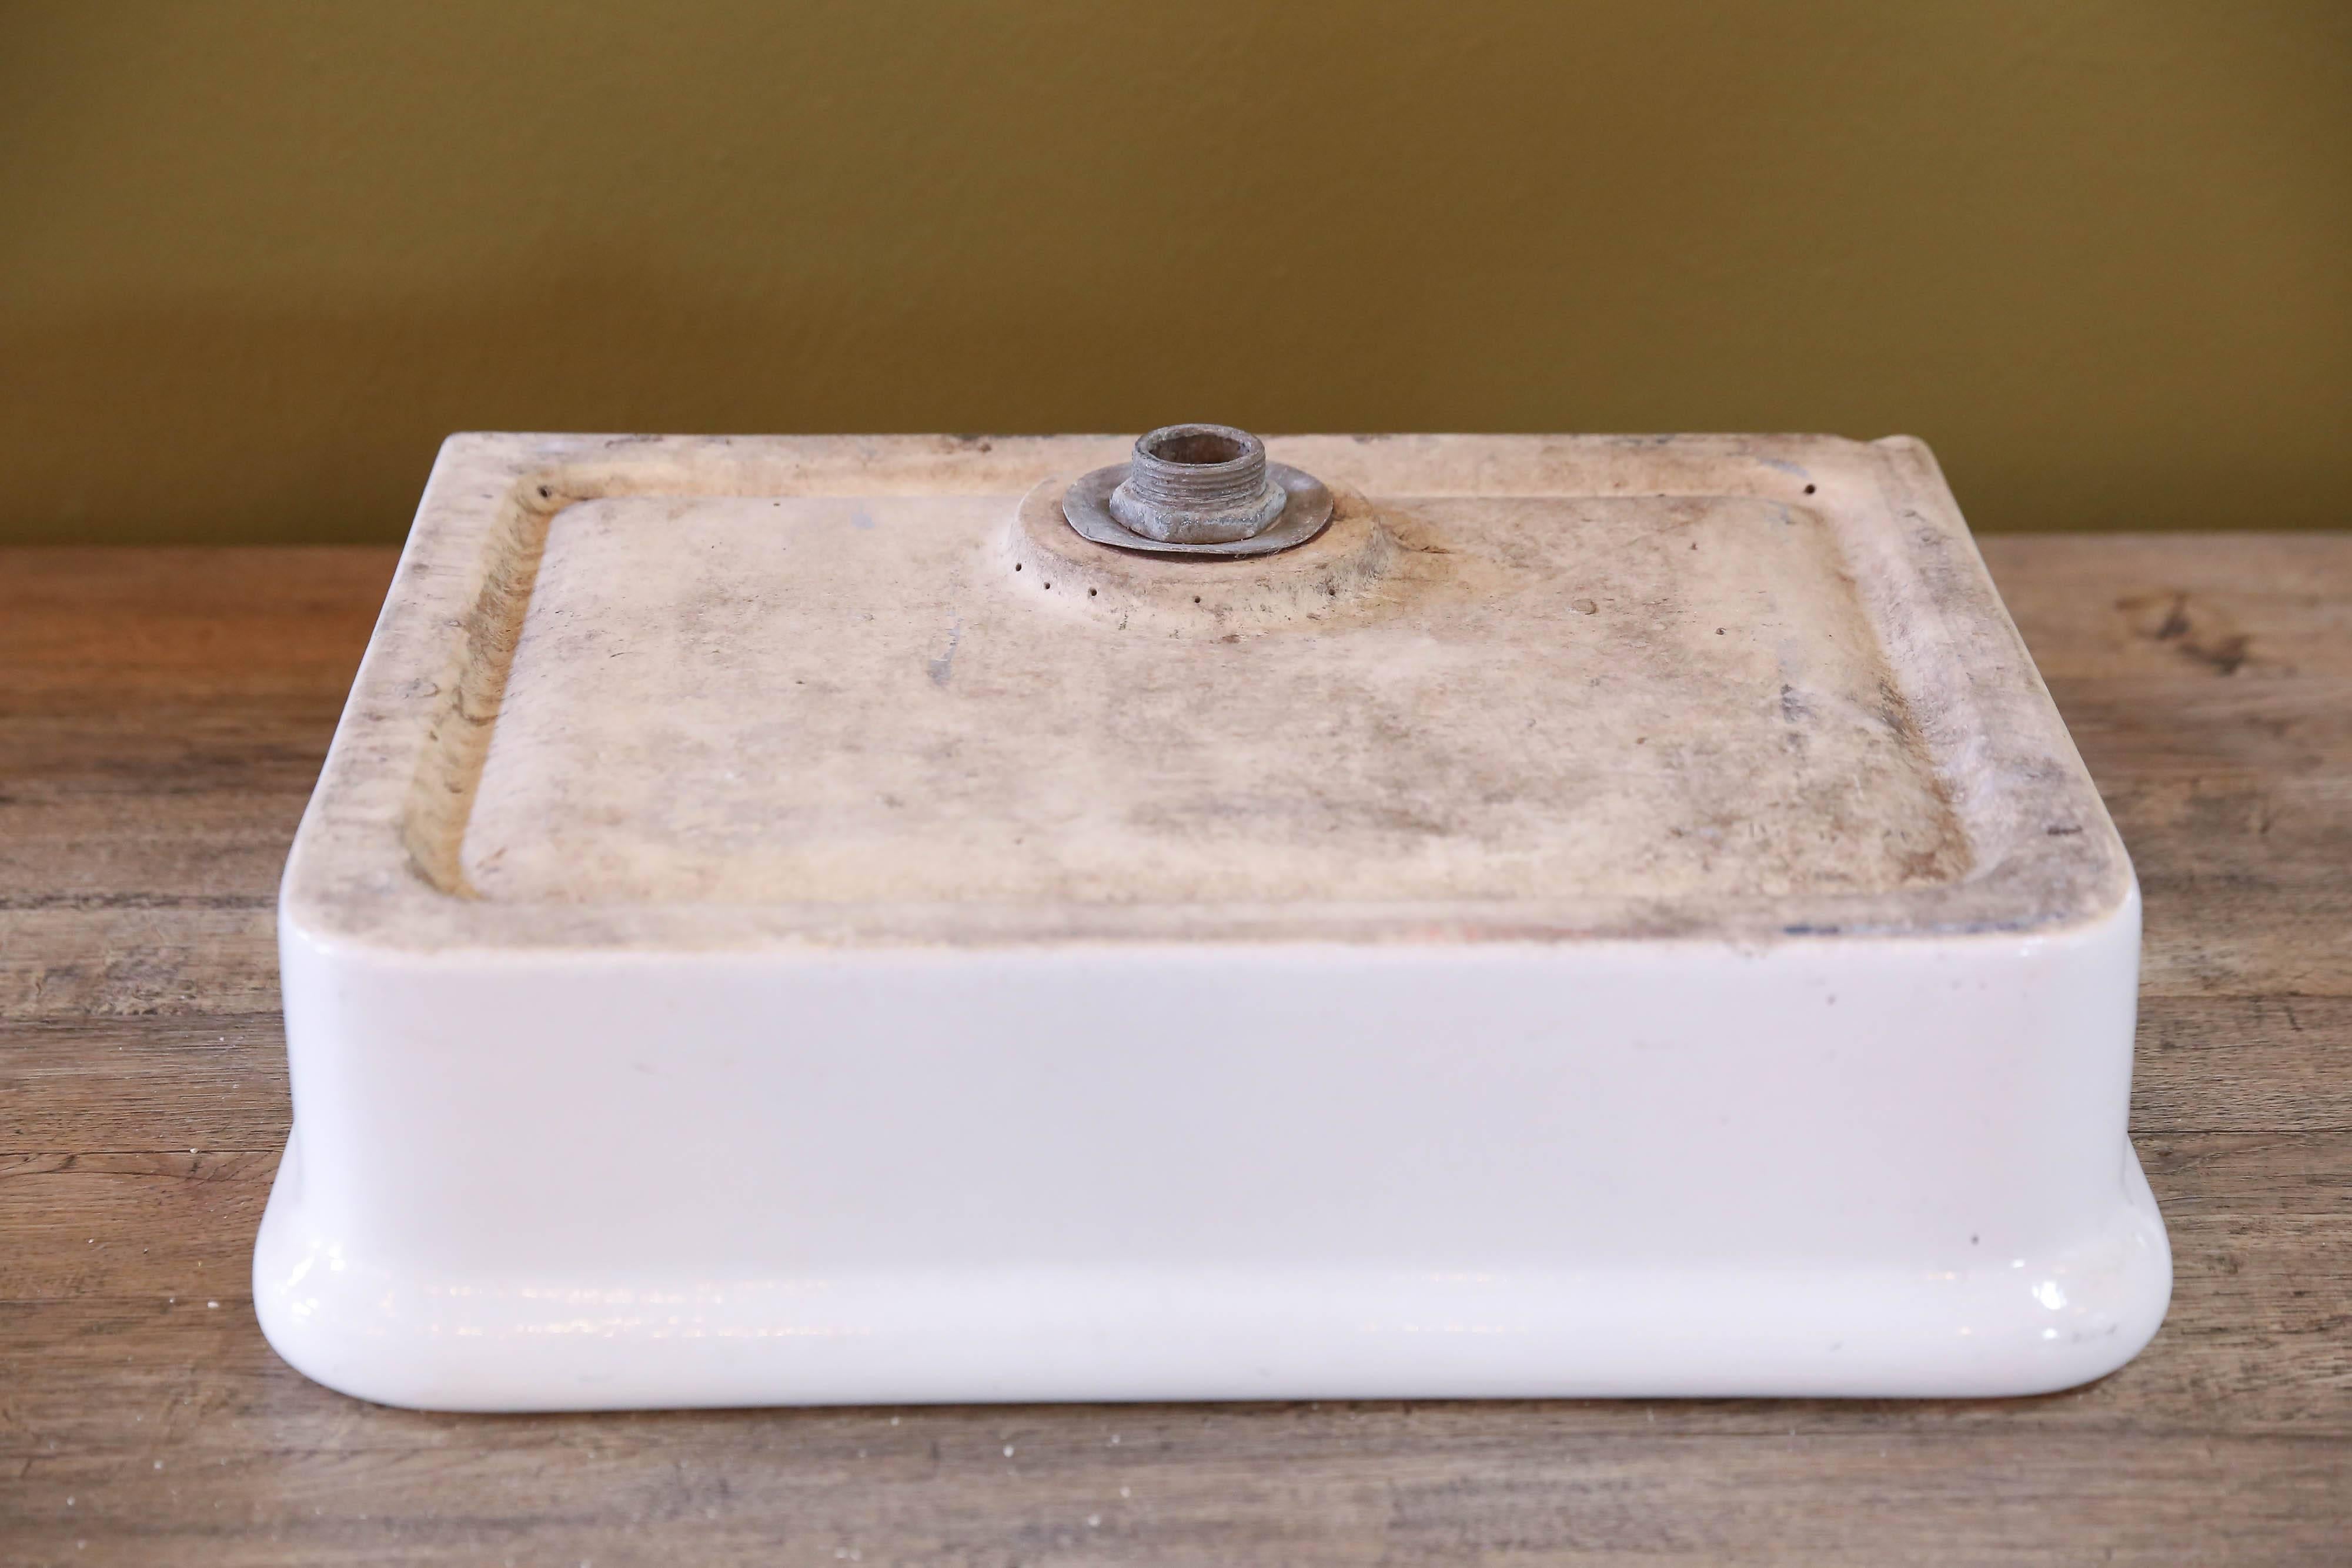 Other White Porcelain Farm Sink with Drain Cover from France, circa 1900